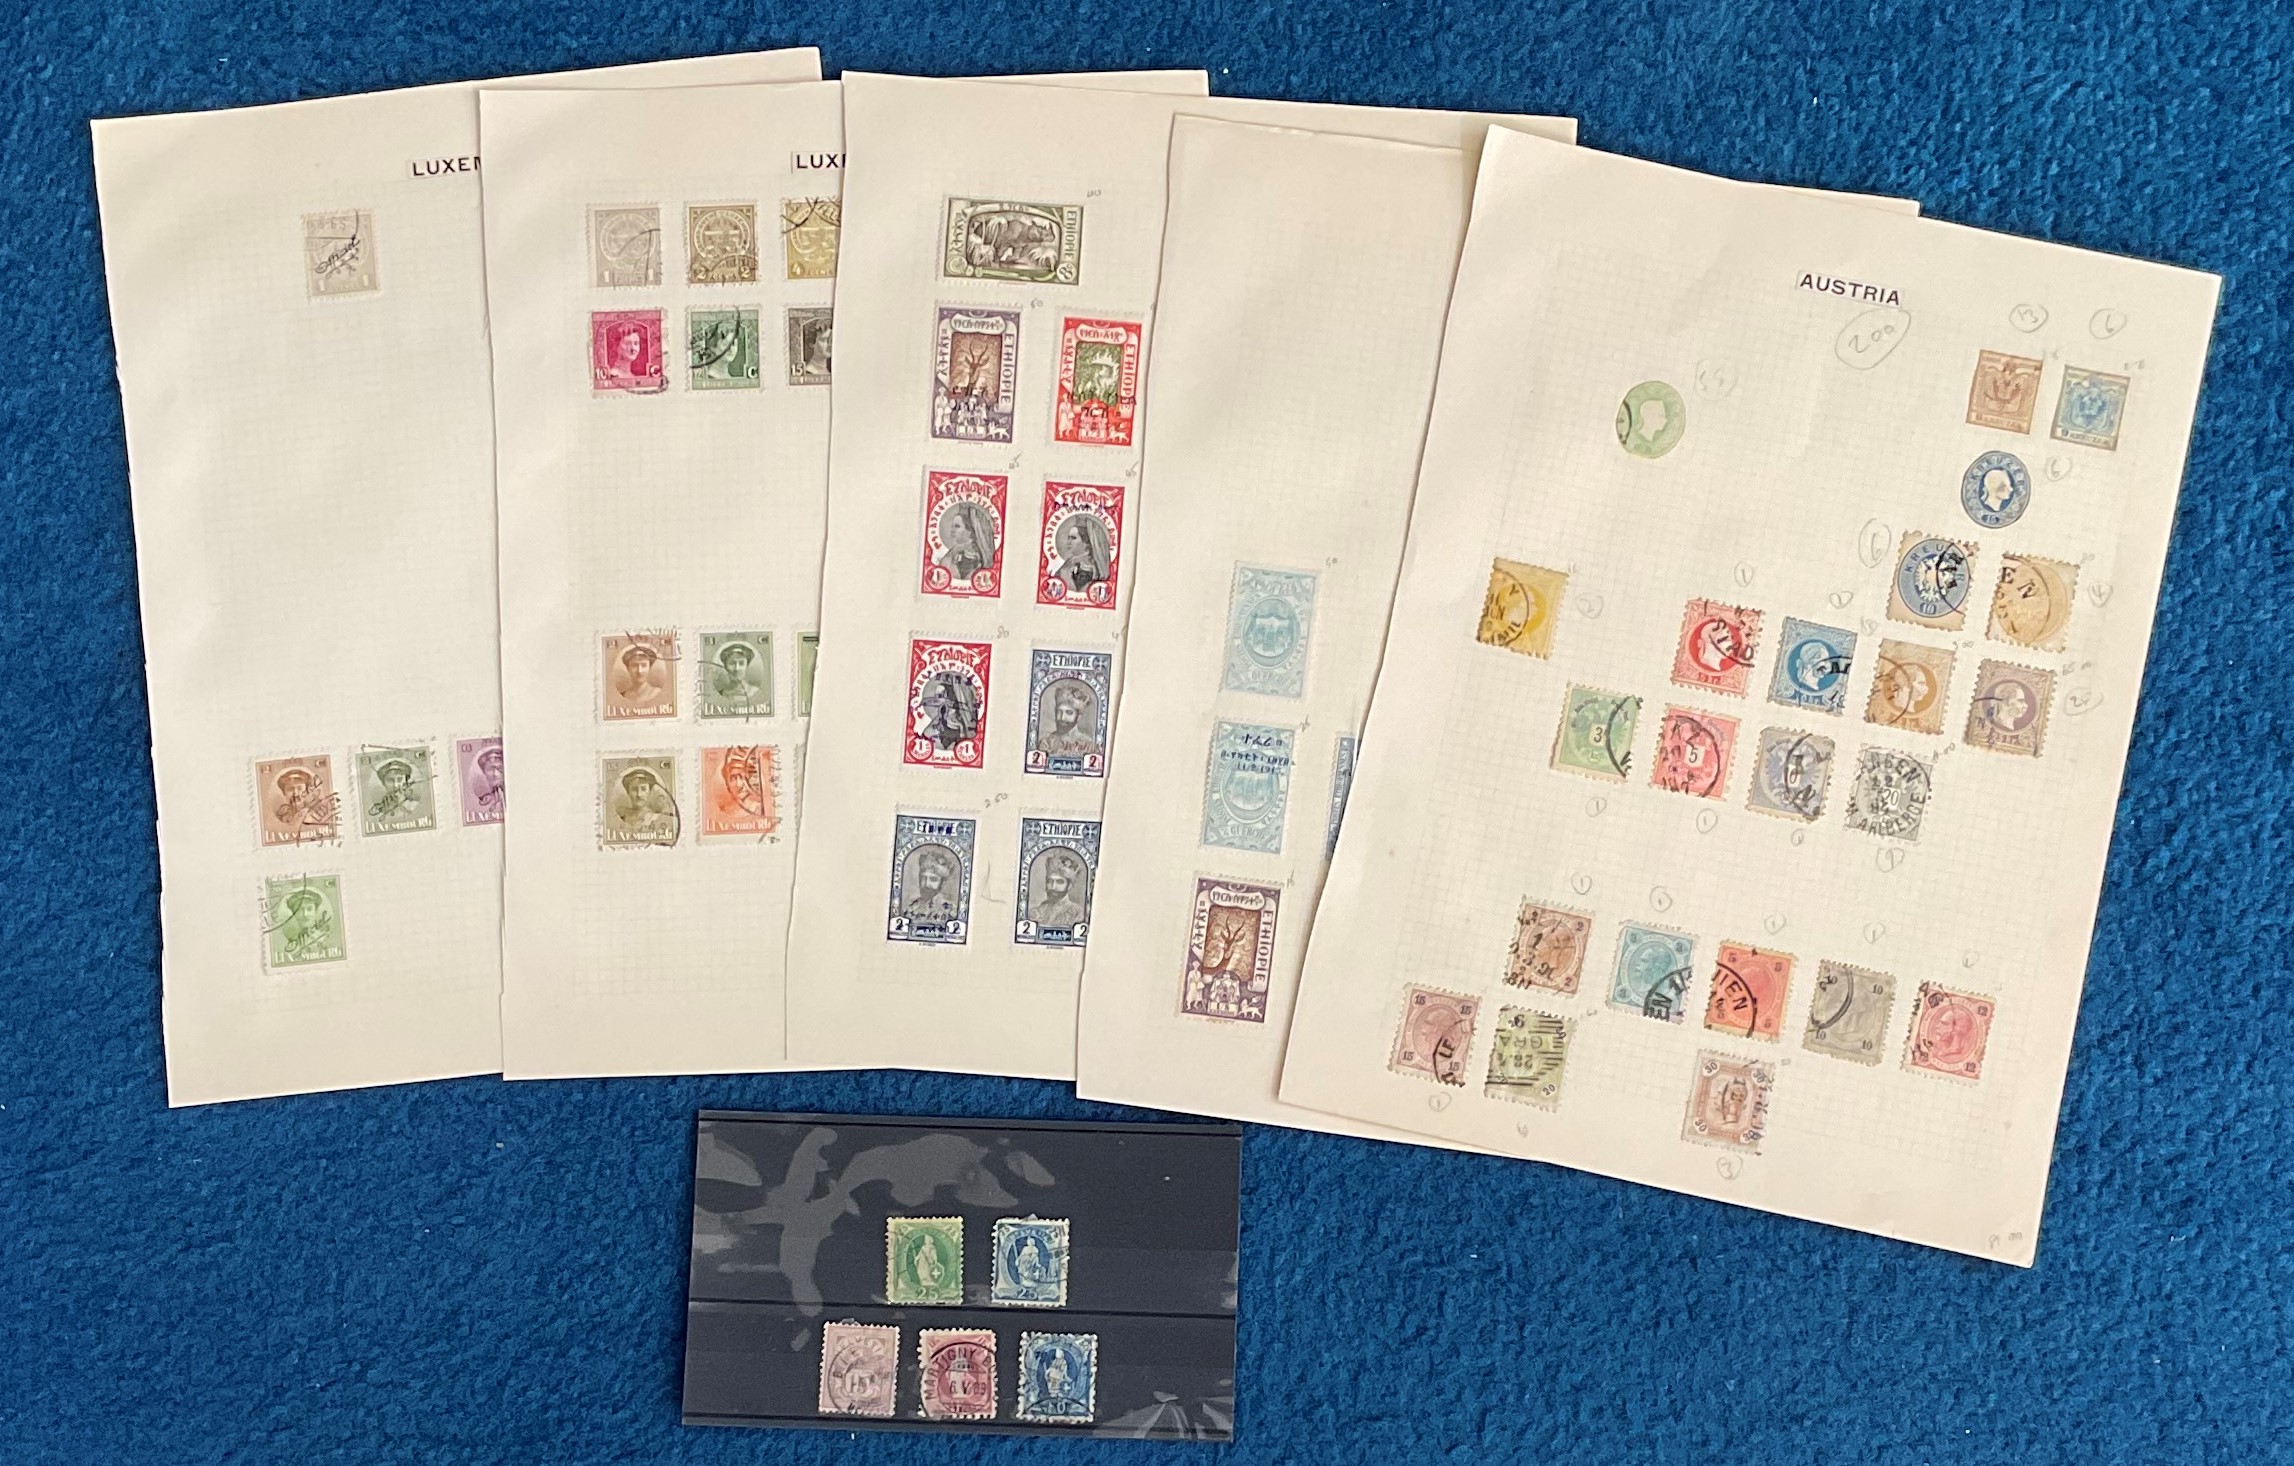 Assorted stamp collection. Includes Switzerland, Austria, Ethiopia and Luxembourg. Good condition.